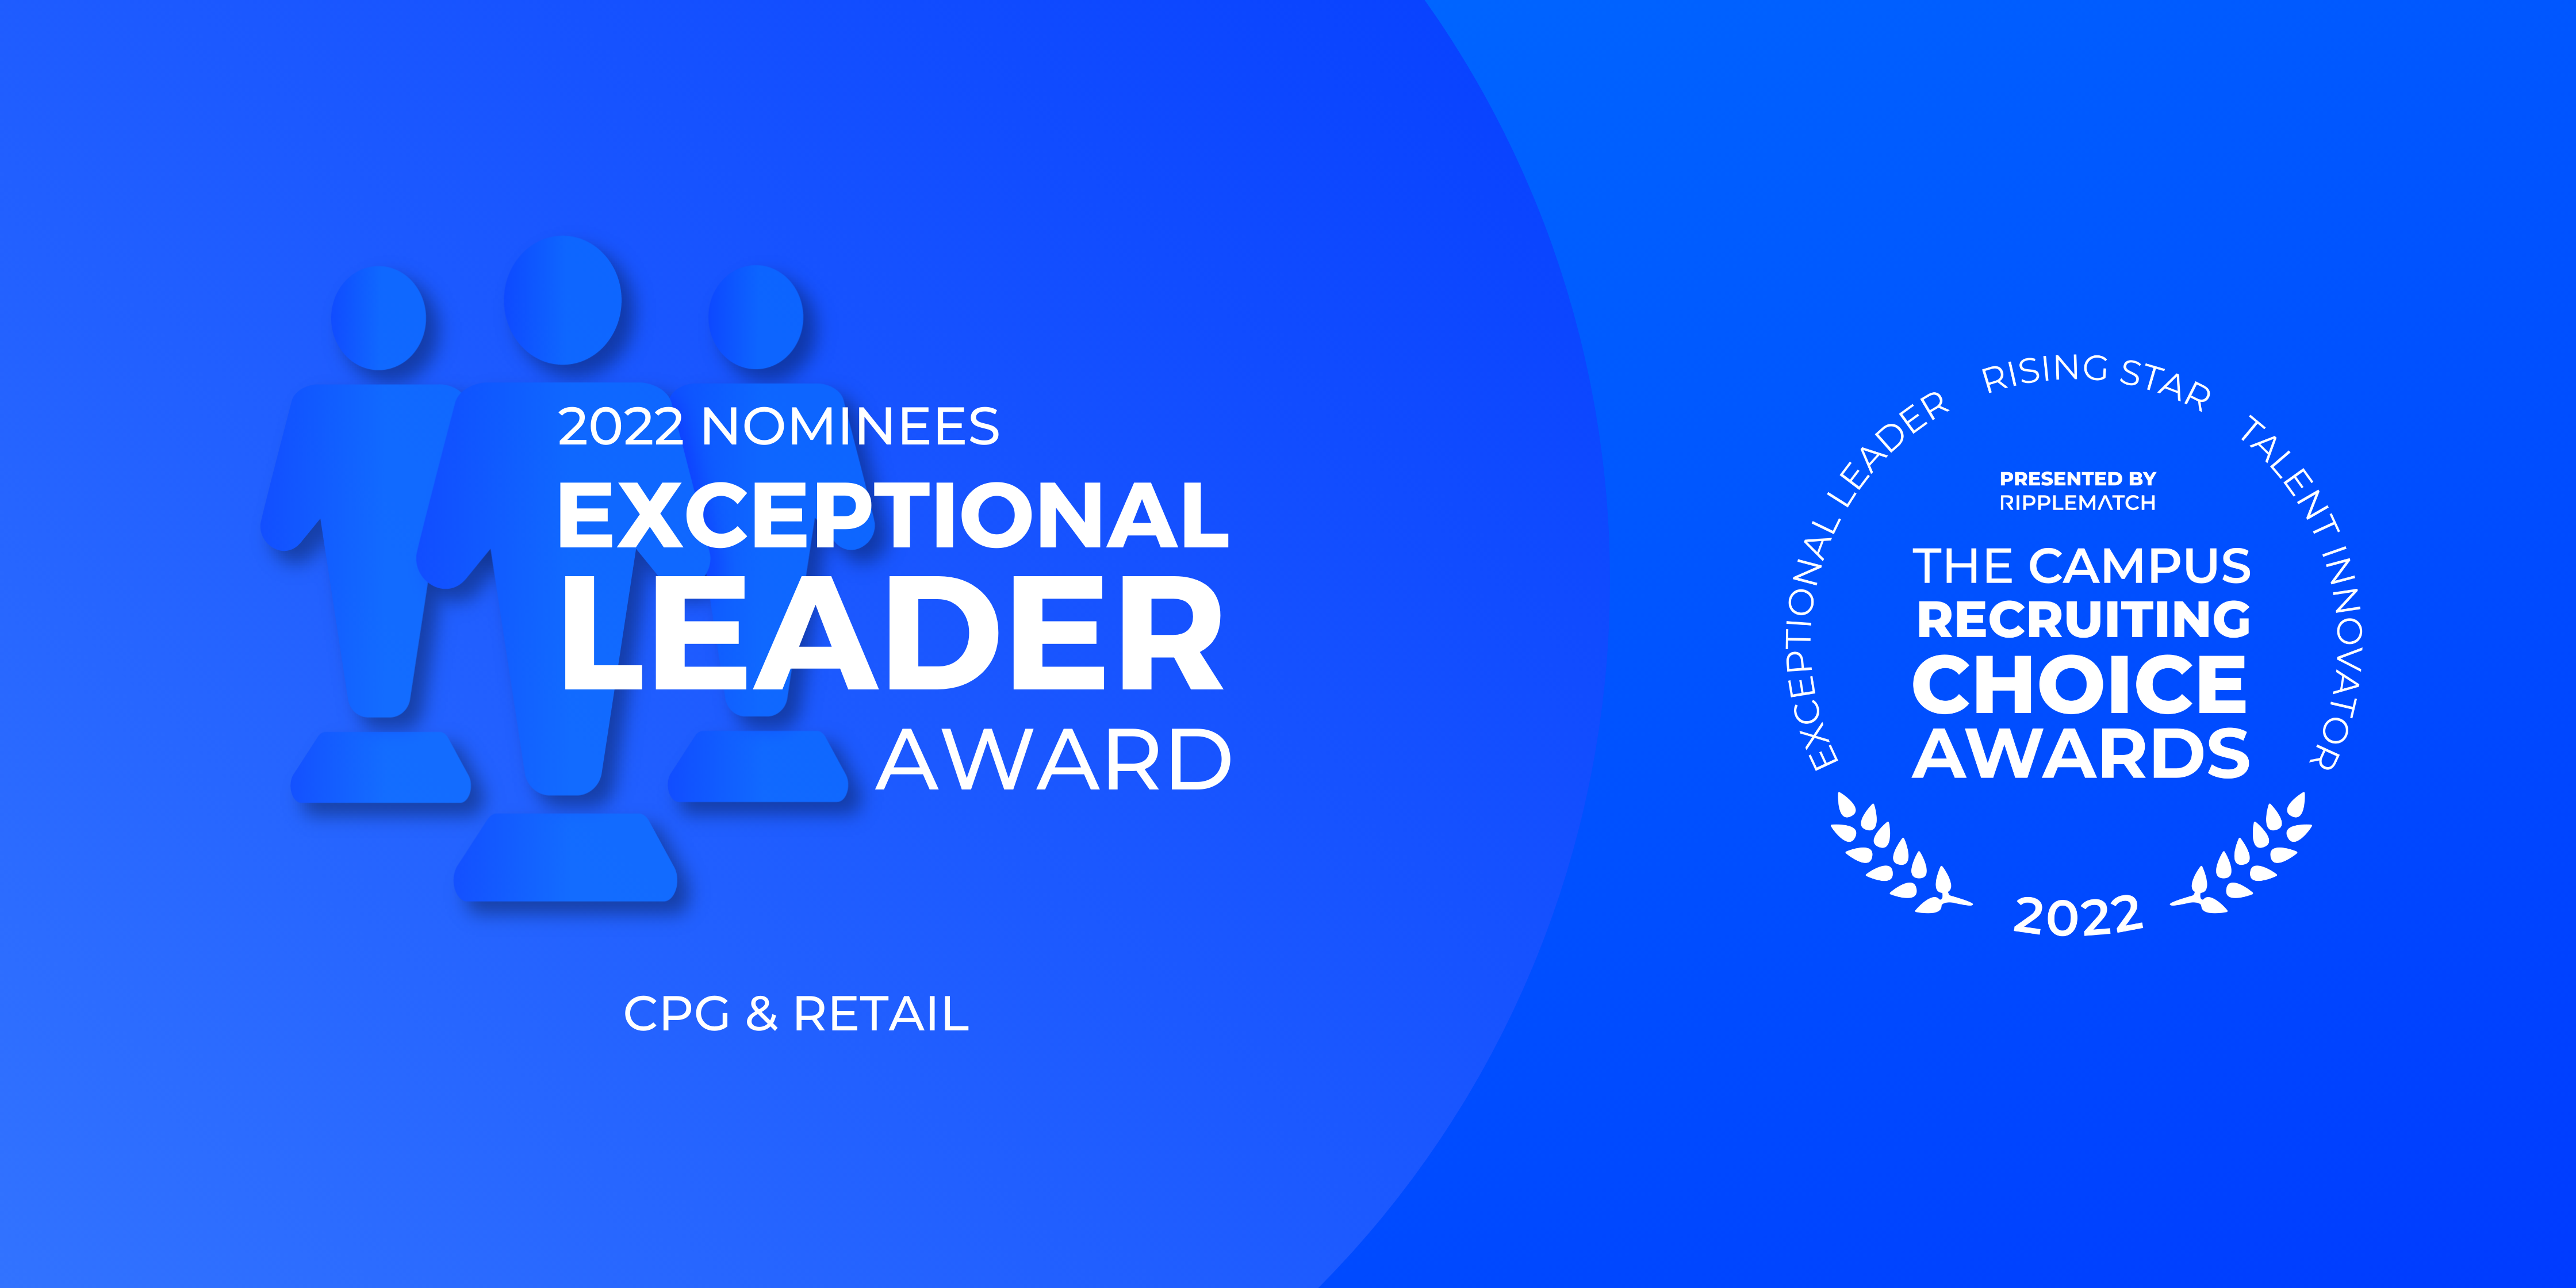 Exceptional Leader Award - CPG & Retail